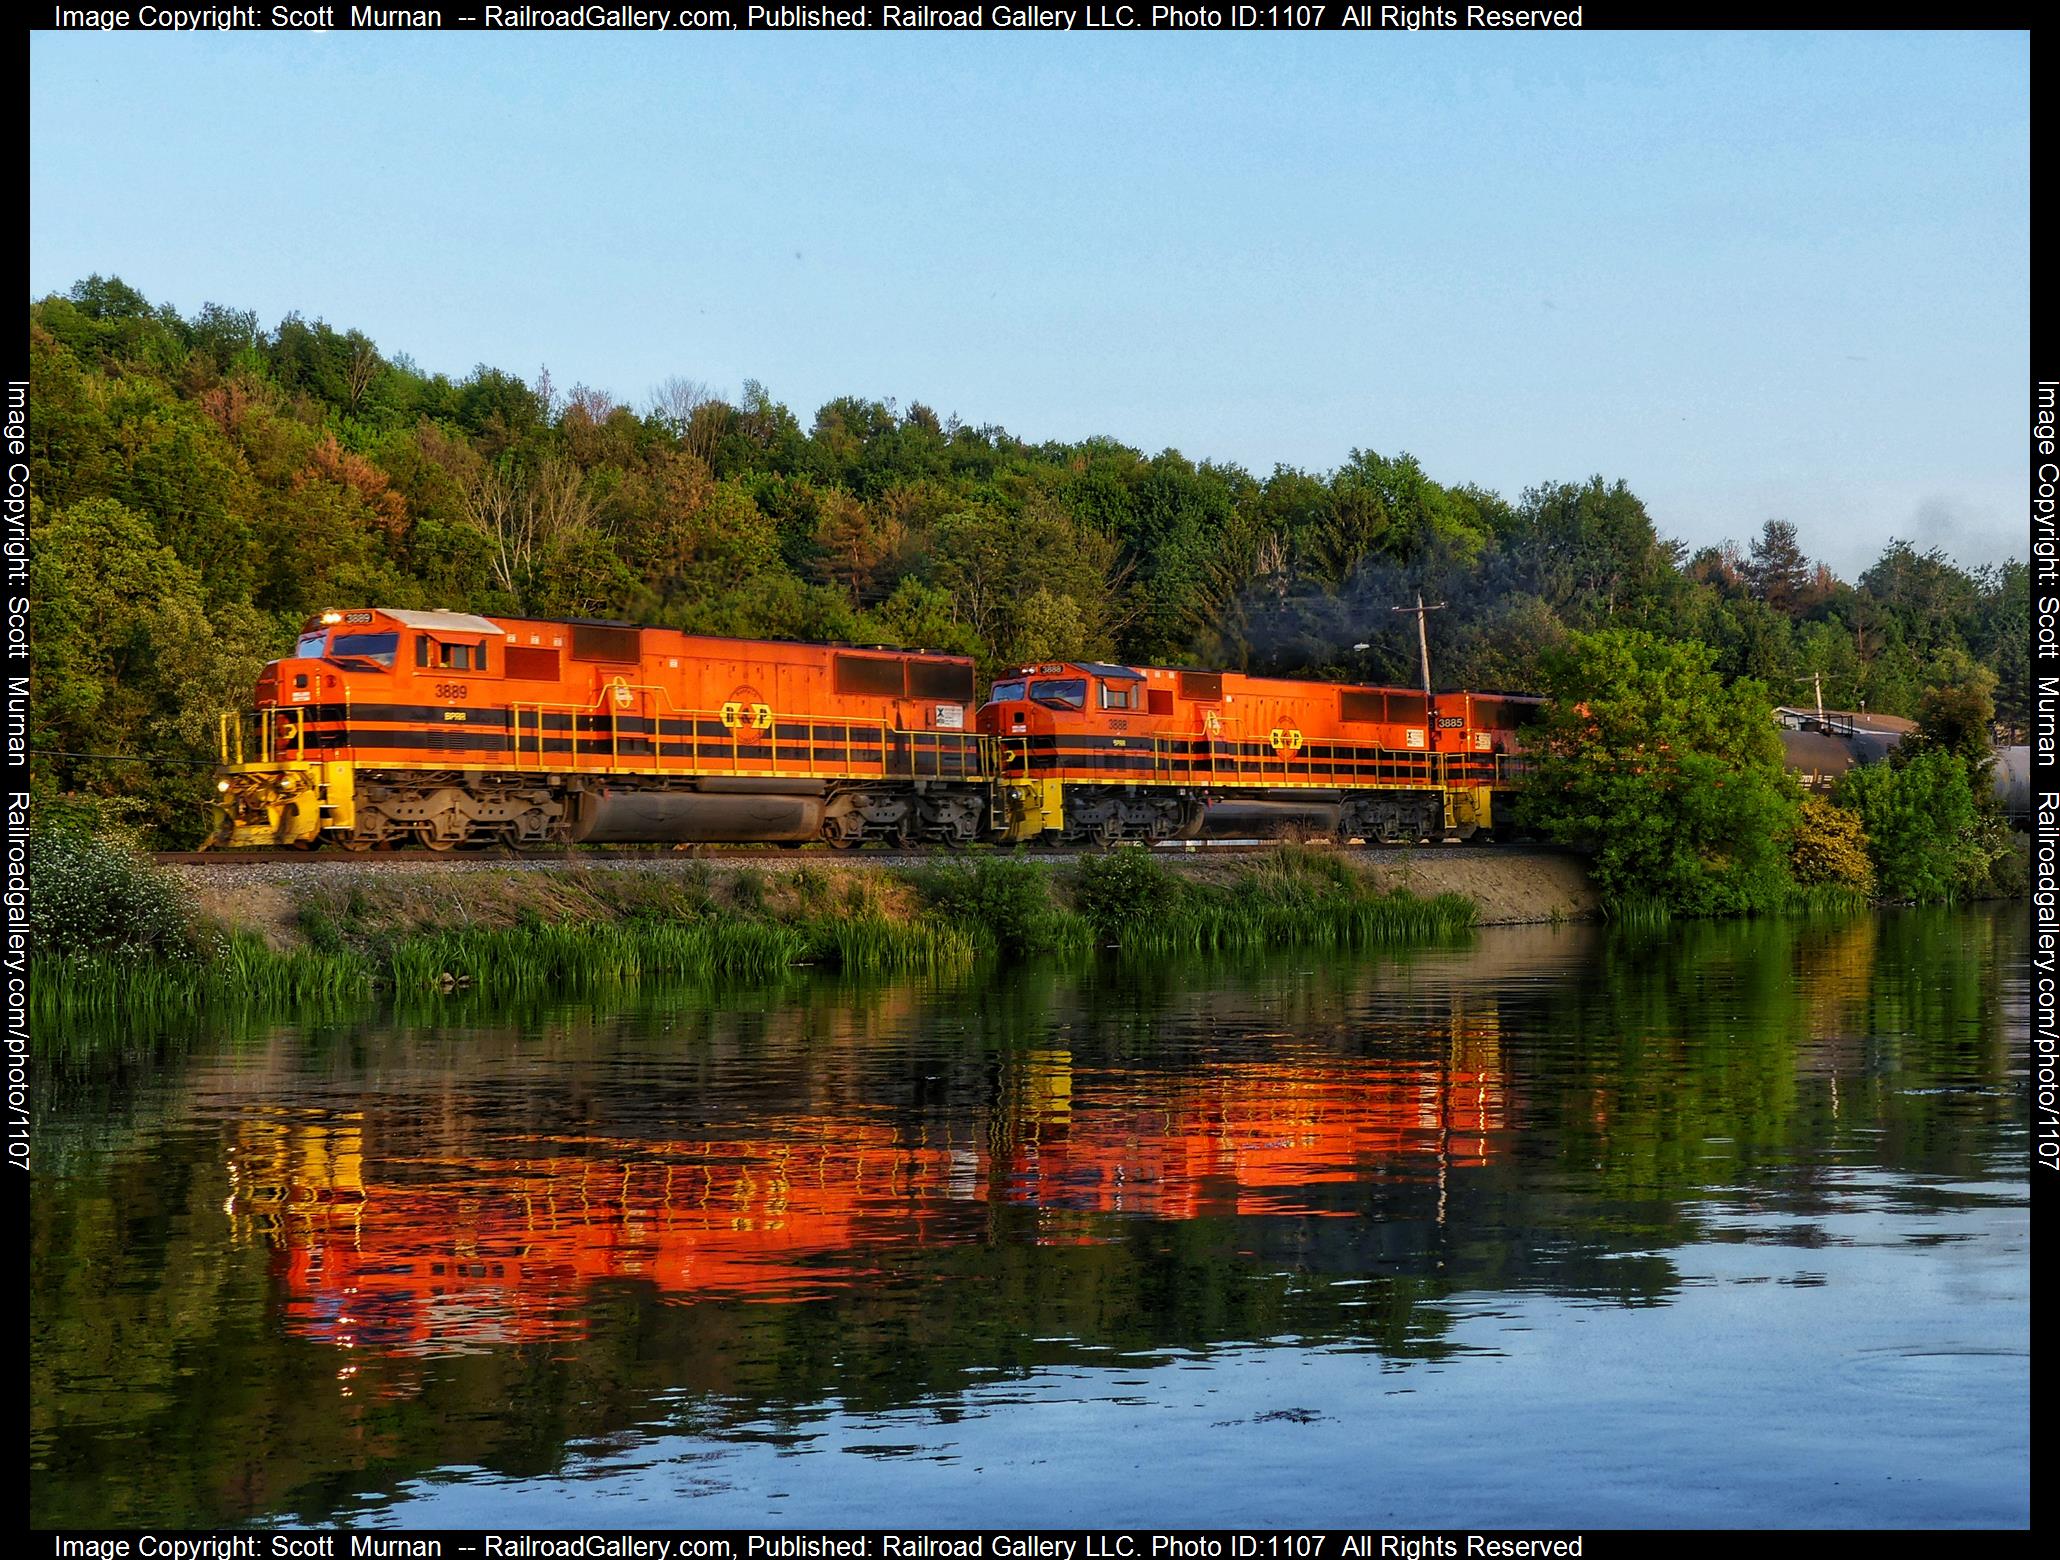 BPRR 3889 is a class EMD SD60I and  is pictured in Lime Lake , New York, United States.  This was taken along the Buffalo Line  on the Buffalo and Pittsburgh Railroad. Photo Copyright: Scott  Murnan  uploaded to Railroad Gallery on 06/02/2023. This photograph of BPRR 3889 was taken on Thursday, June 01, 2023. All Rights Reserved. 